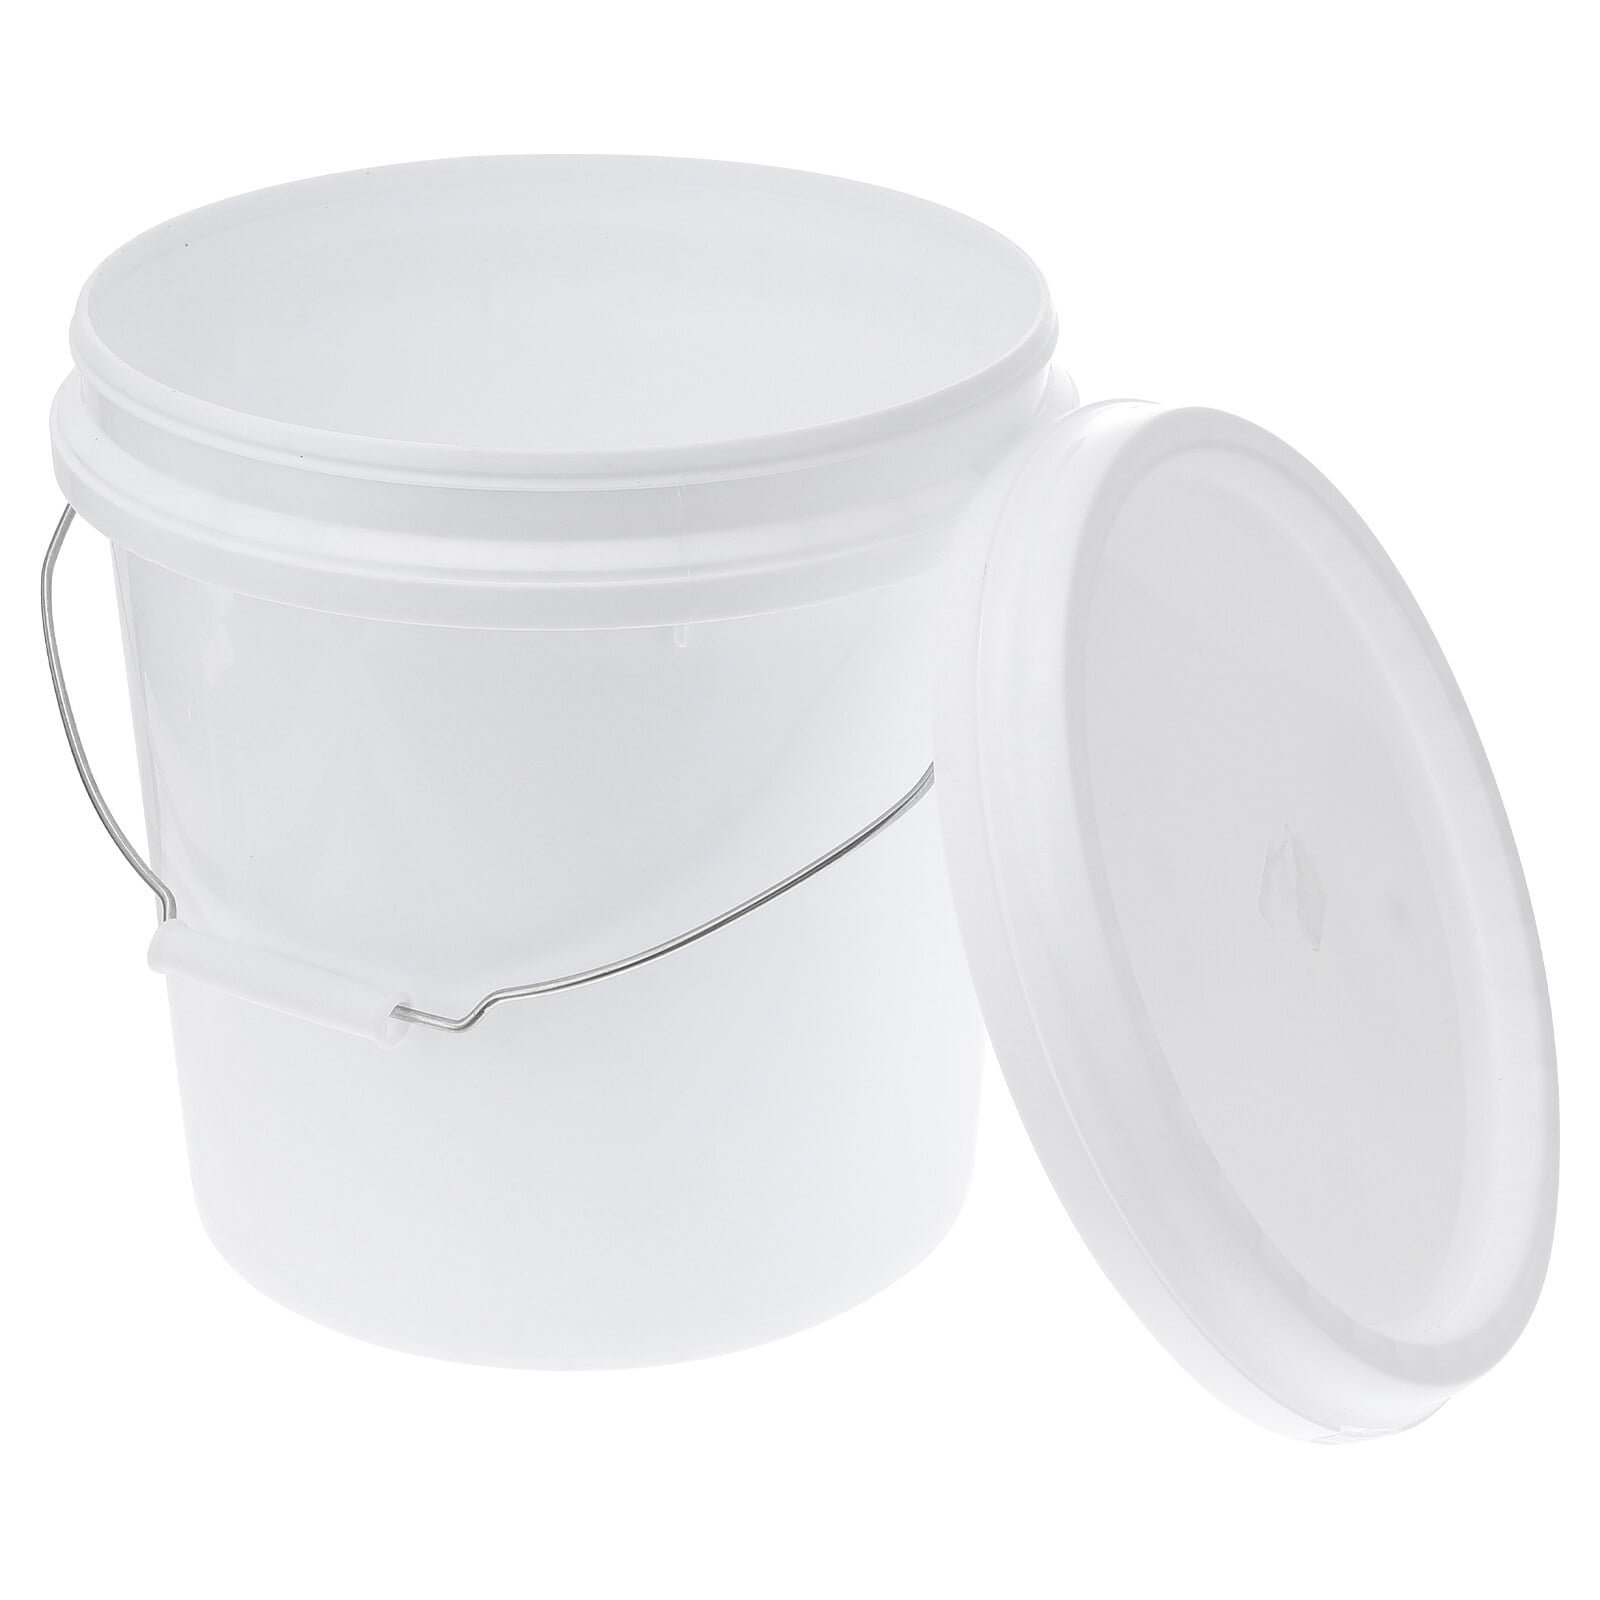 3 Gallon Food Grade White Plastic Bucket with Handle and Lid, Portable  Plastic Pail 